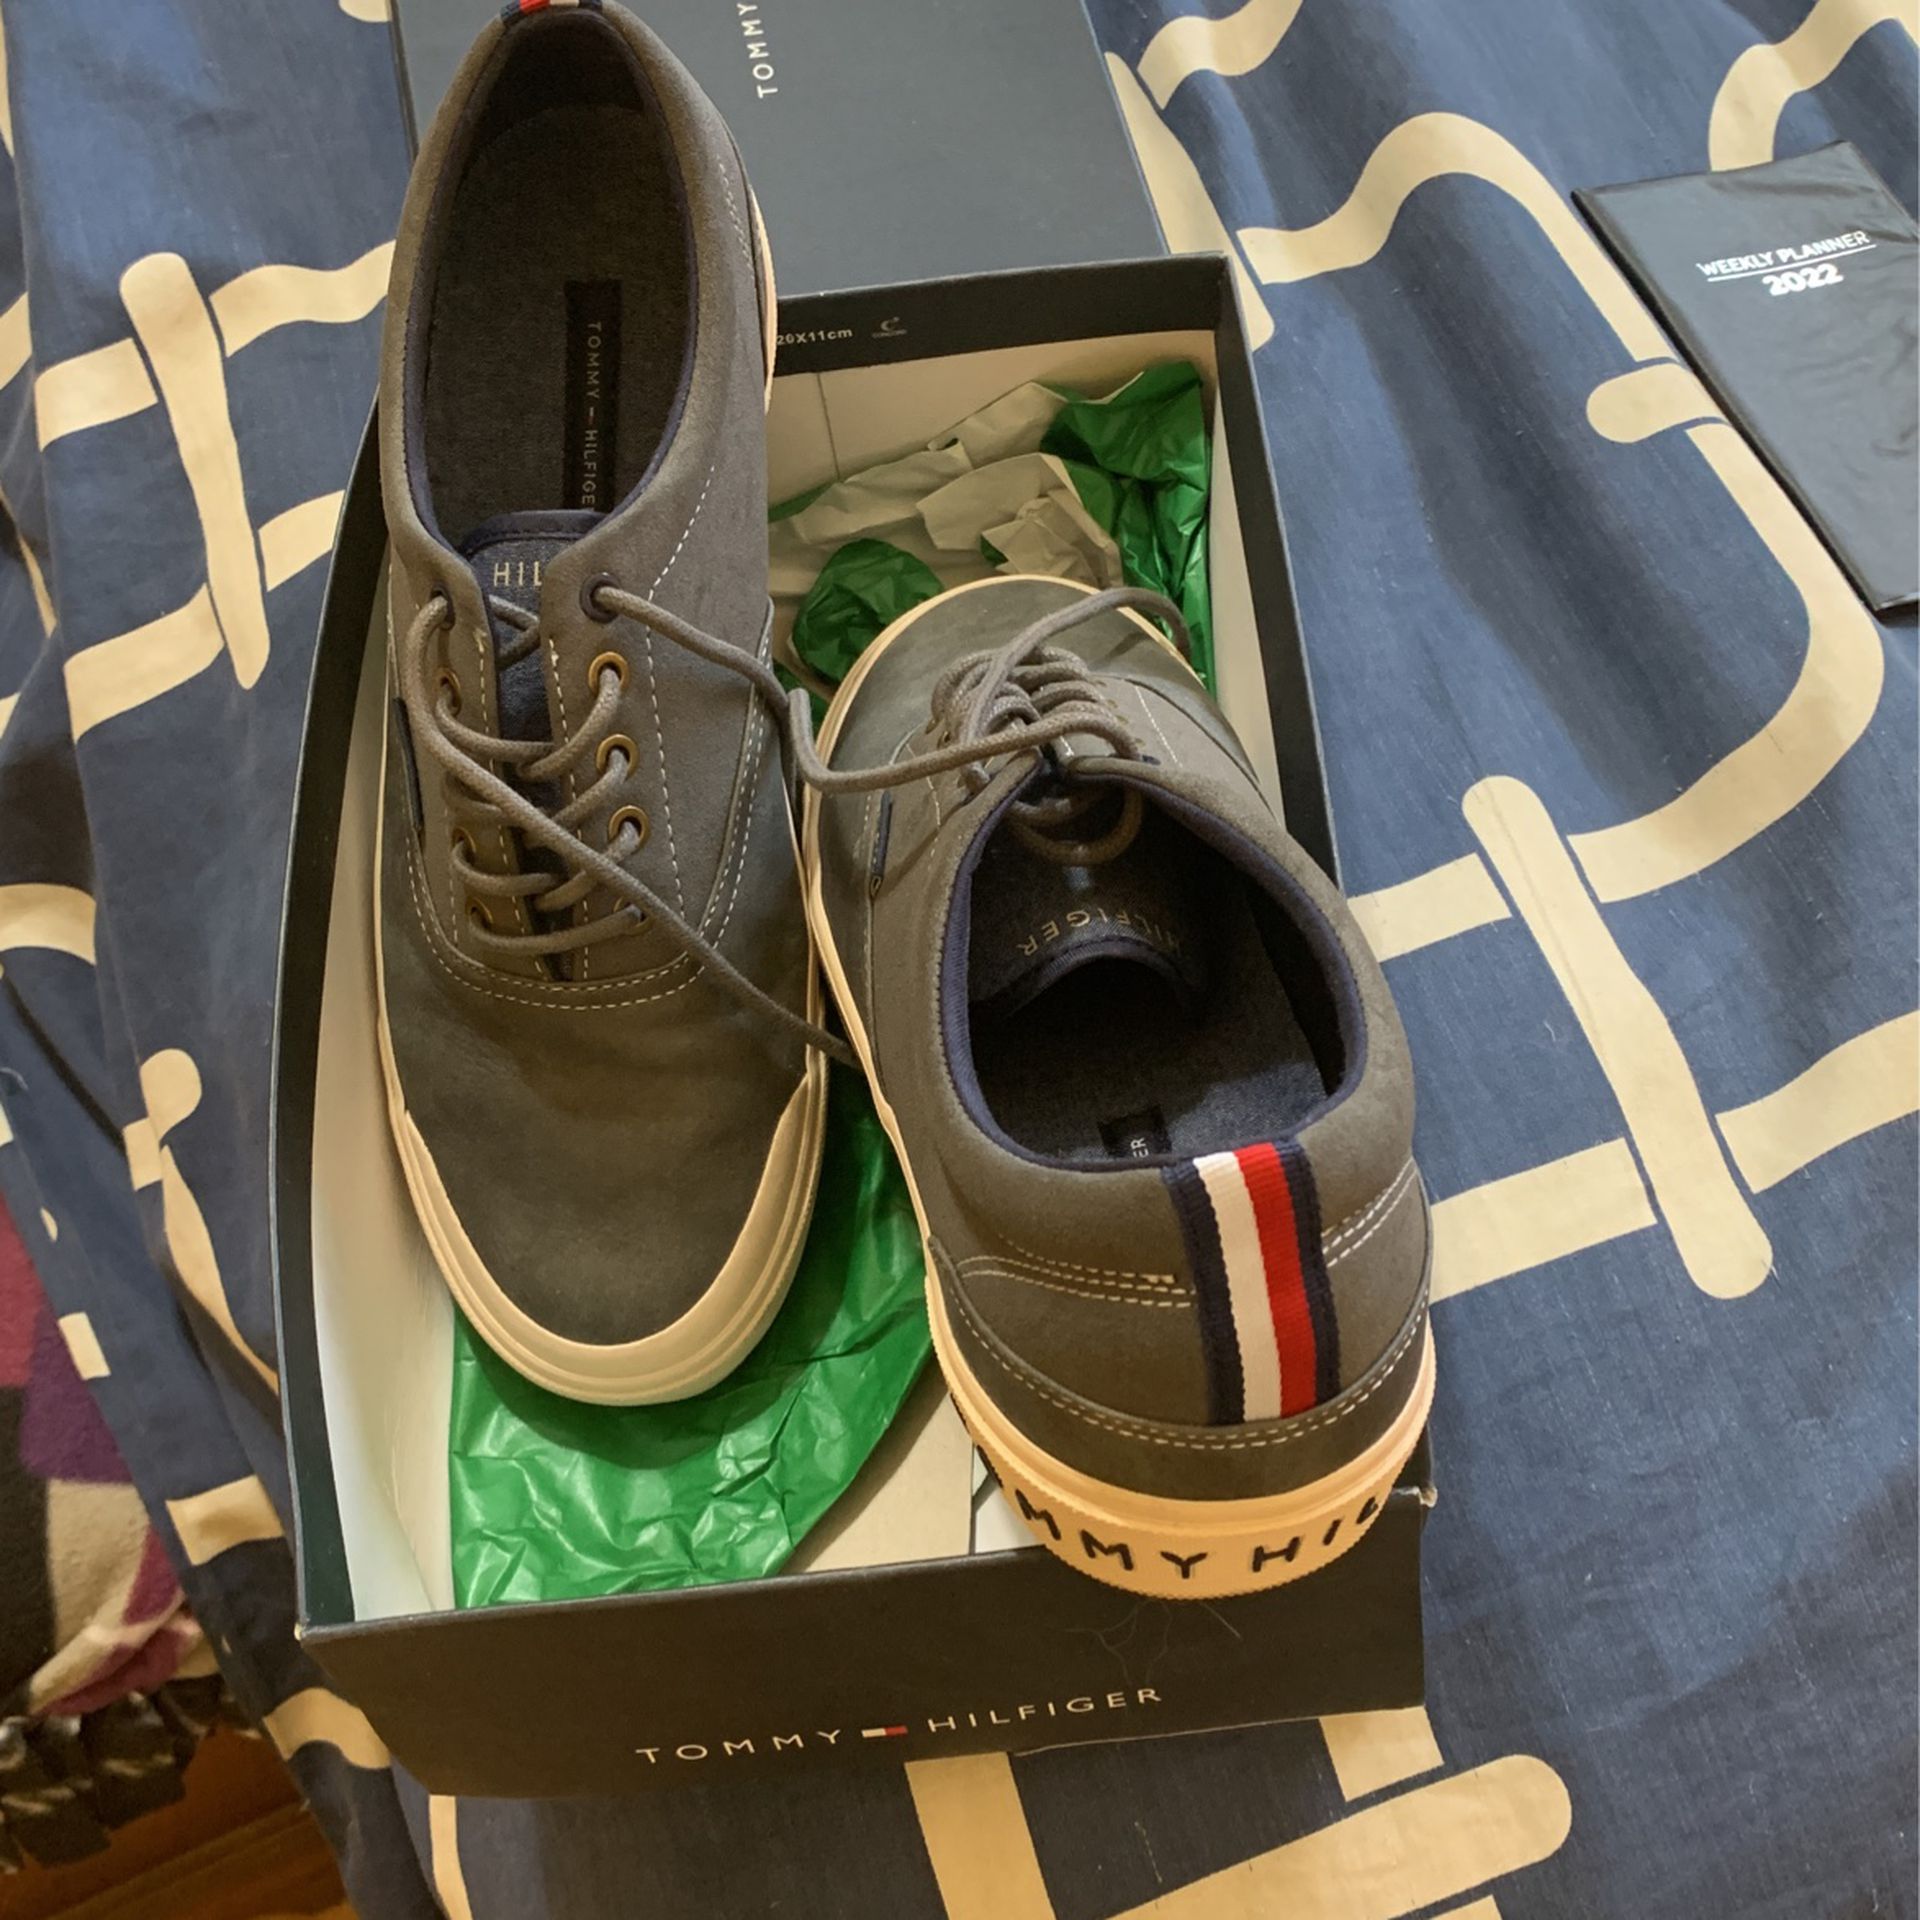 Tommy Hilfiger Sneakers Size for in Naples, FL - OfferUp